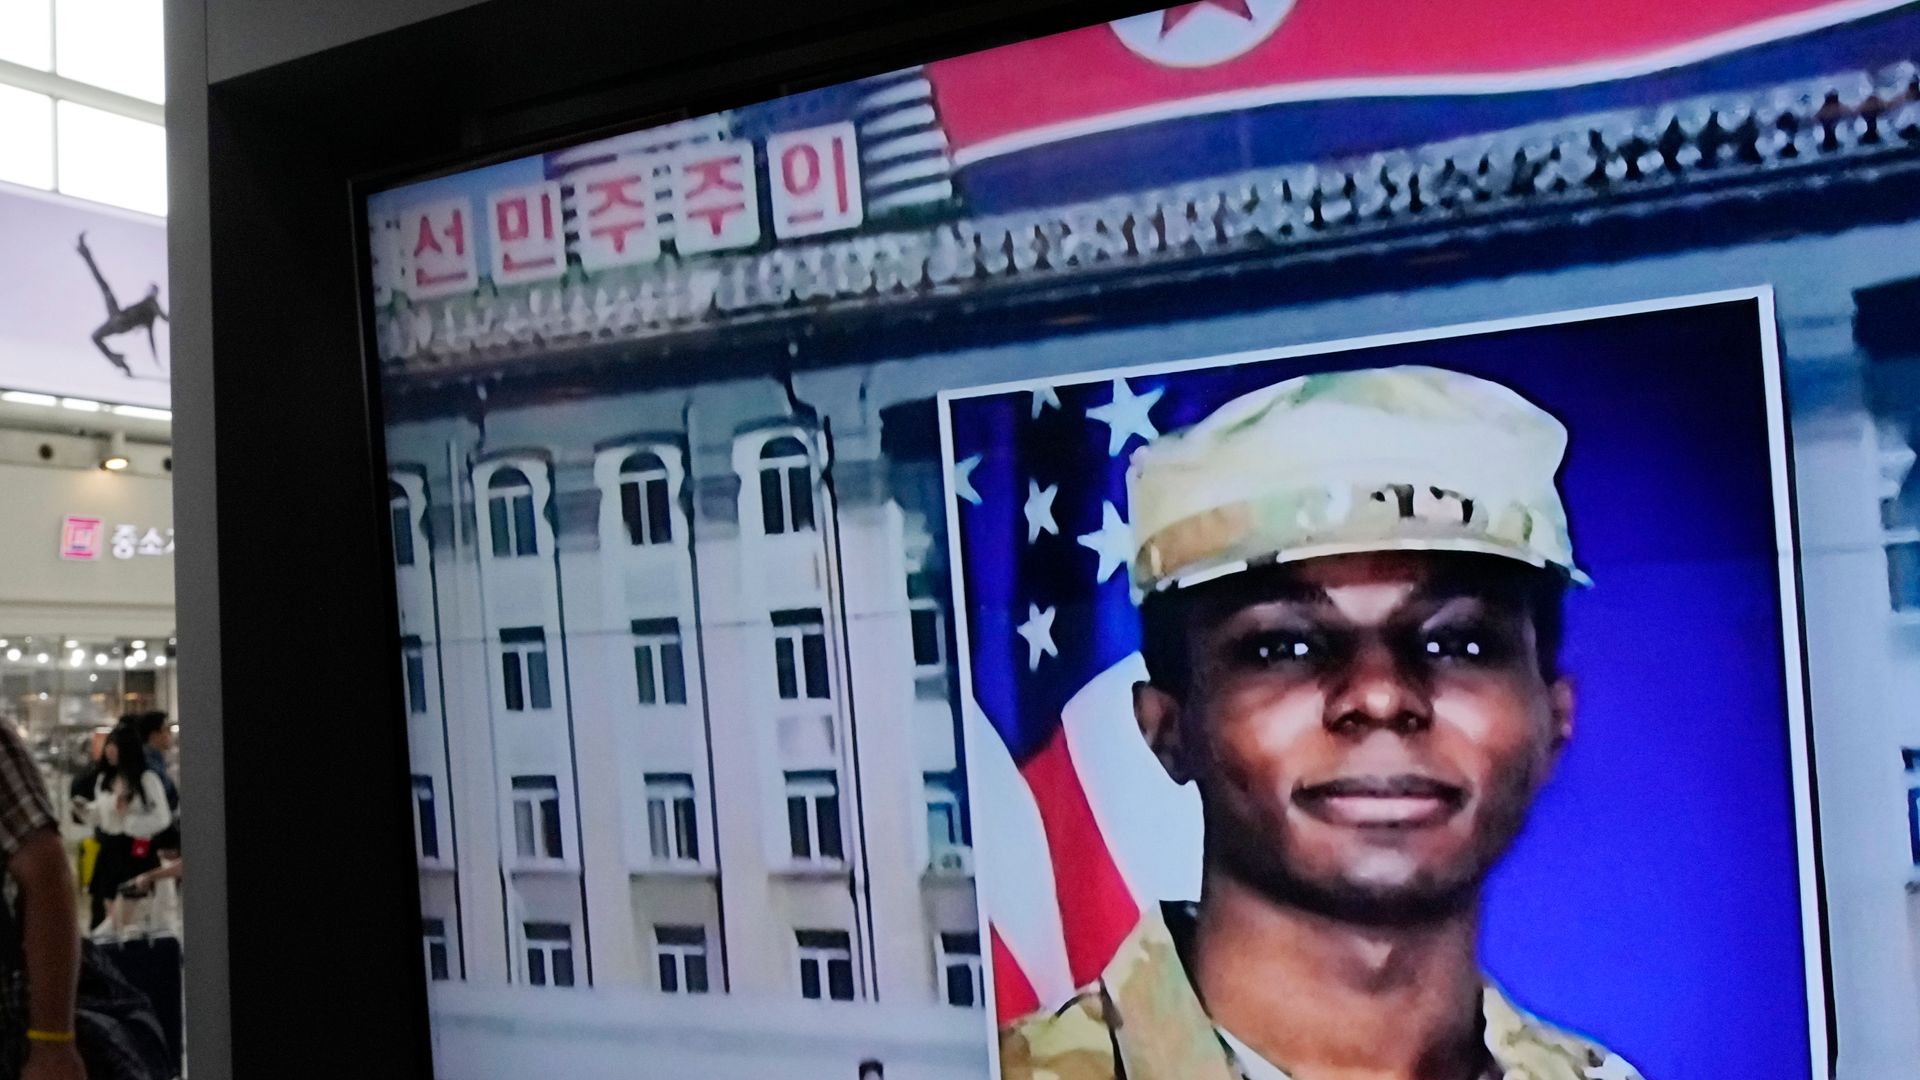 North Korea has concluded that Travis King crossed the South Korean border due to inhuman maltreatment and racial discrimination.